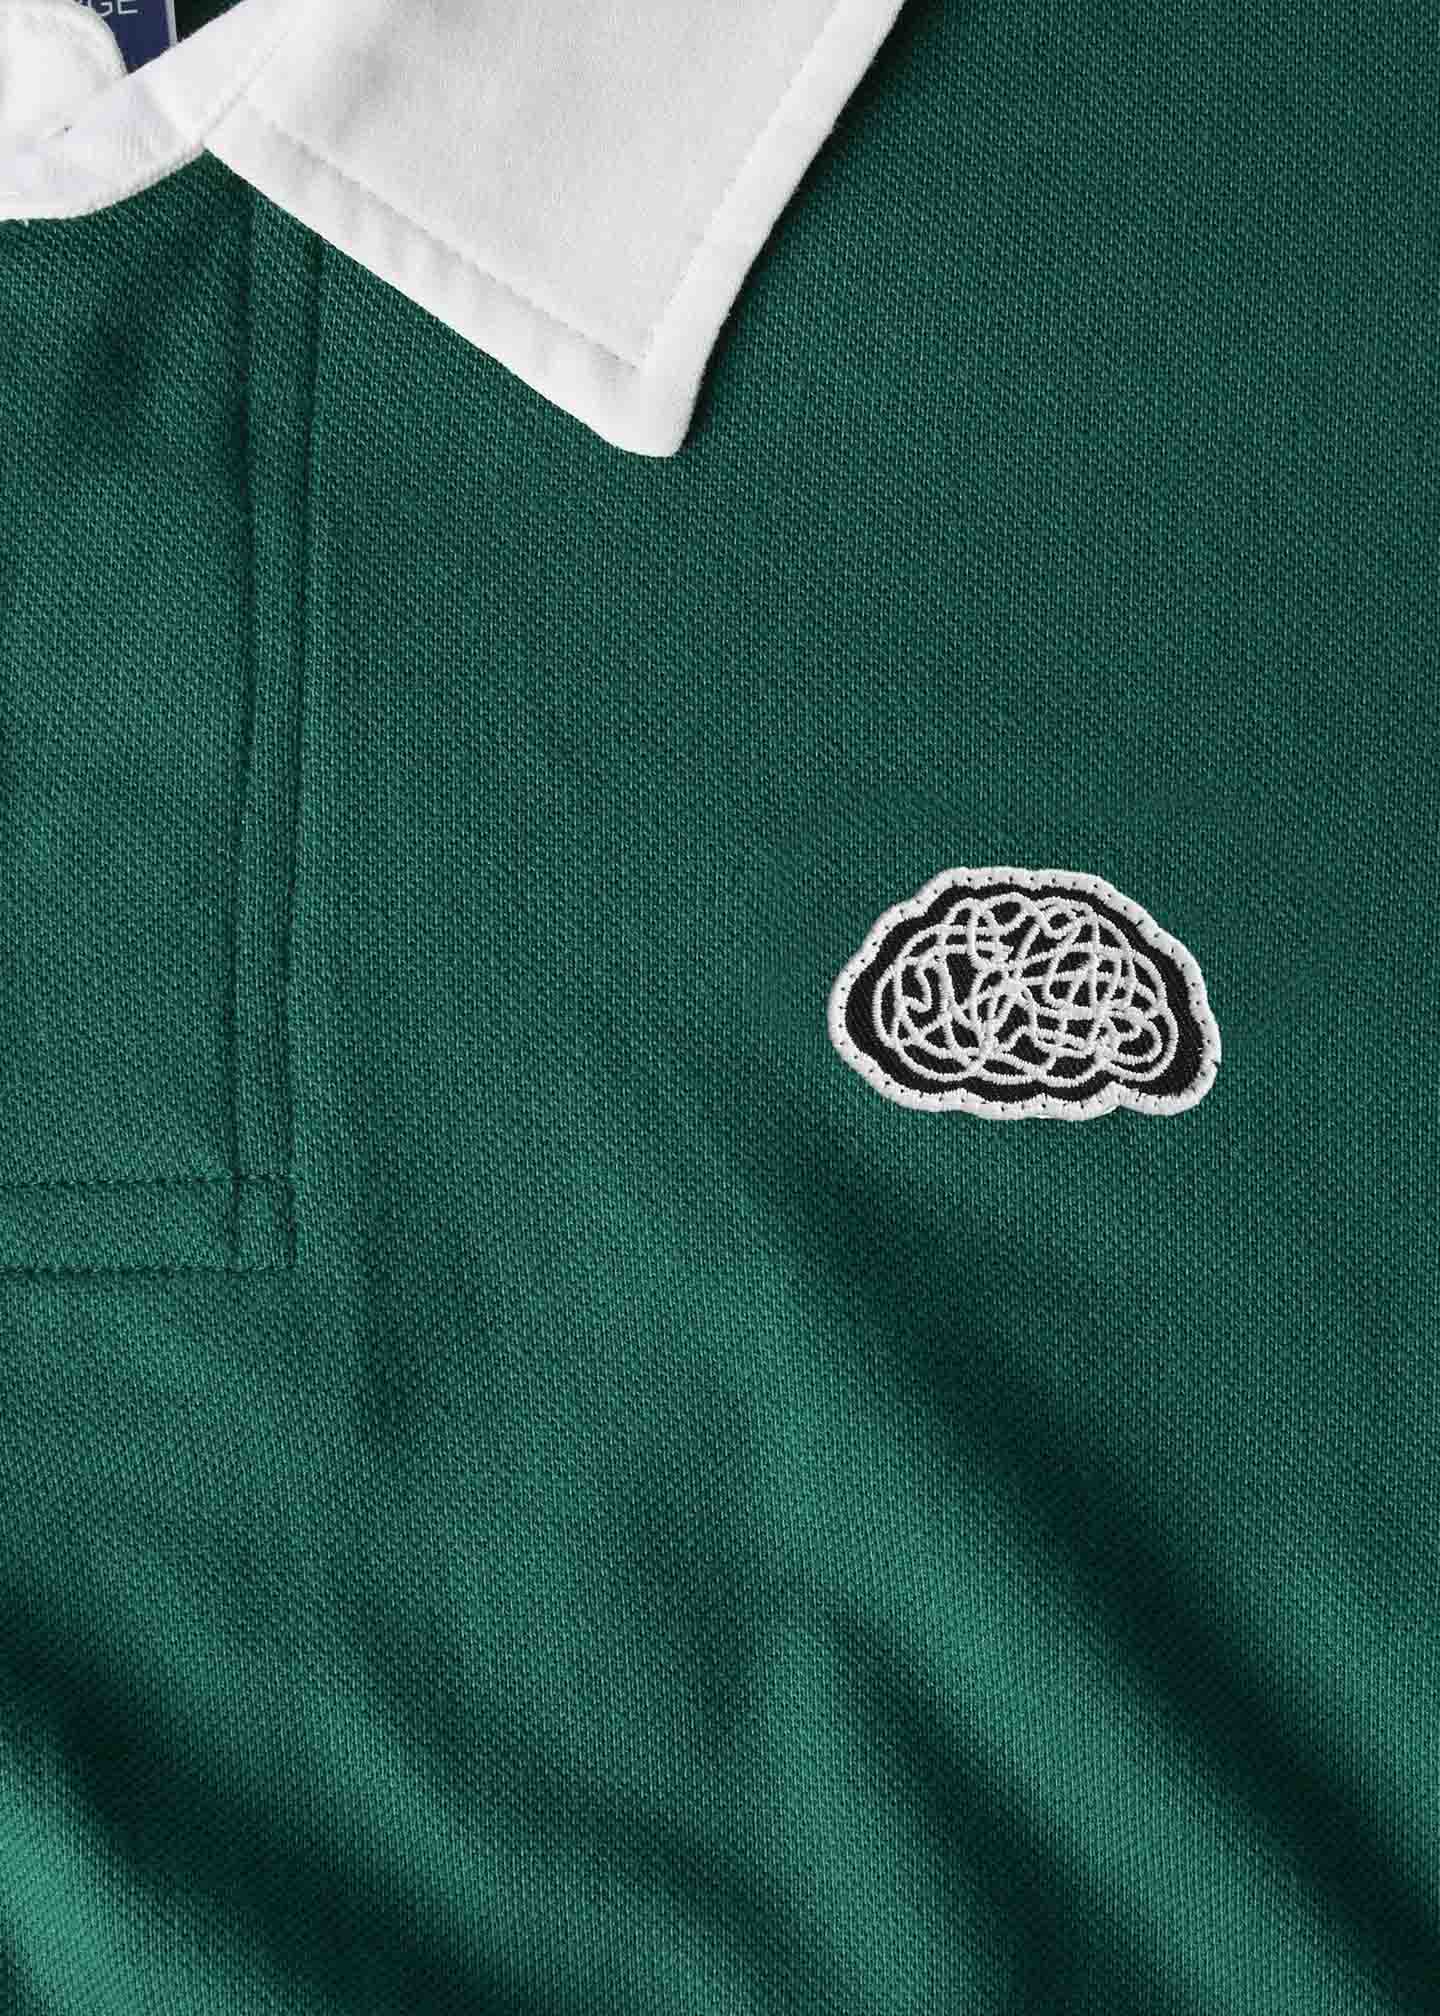 SCATTER BRAIN LS RUGBY POLO : PINE